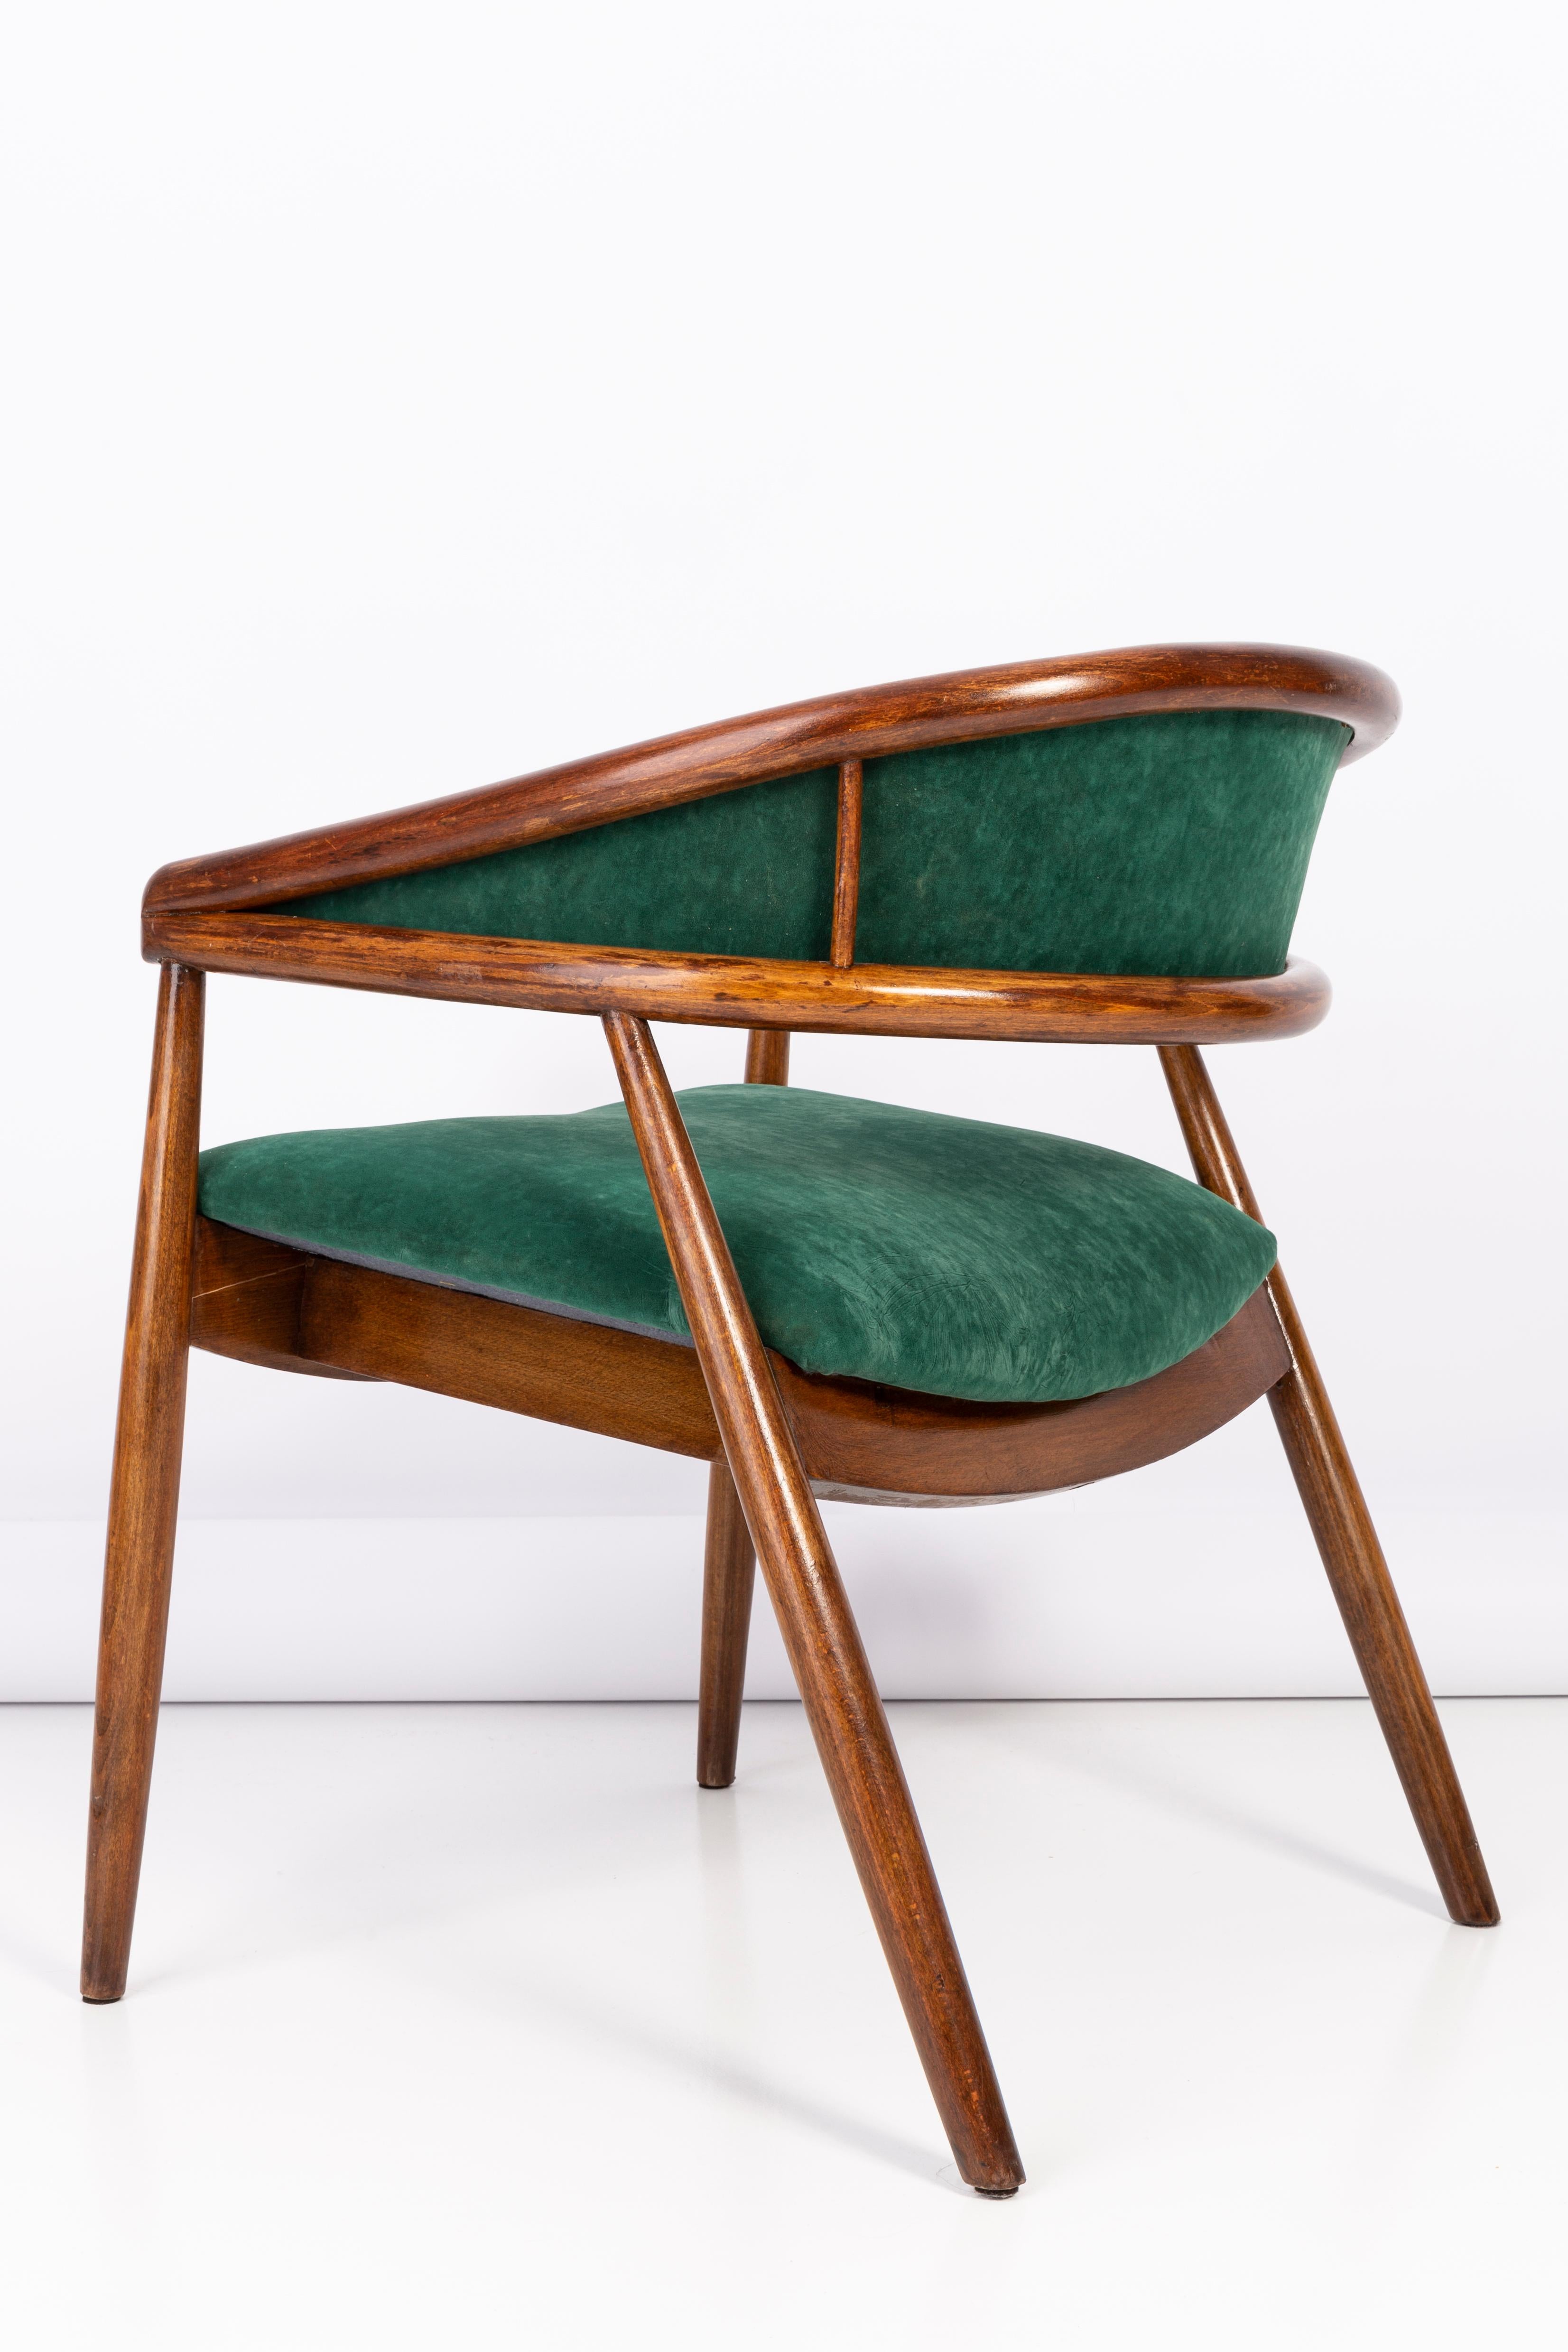 Set of Two Vintage James Mont Bent Beech Armchairs, Dark Green, Europe, 1960s For Sale 3